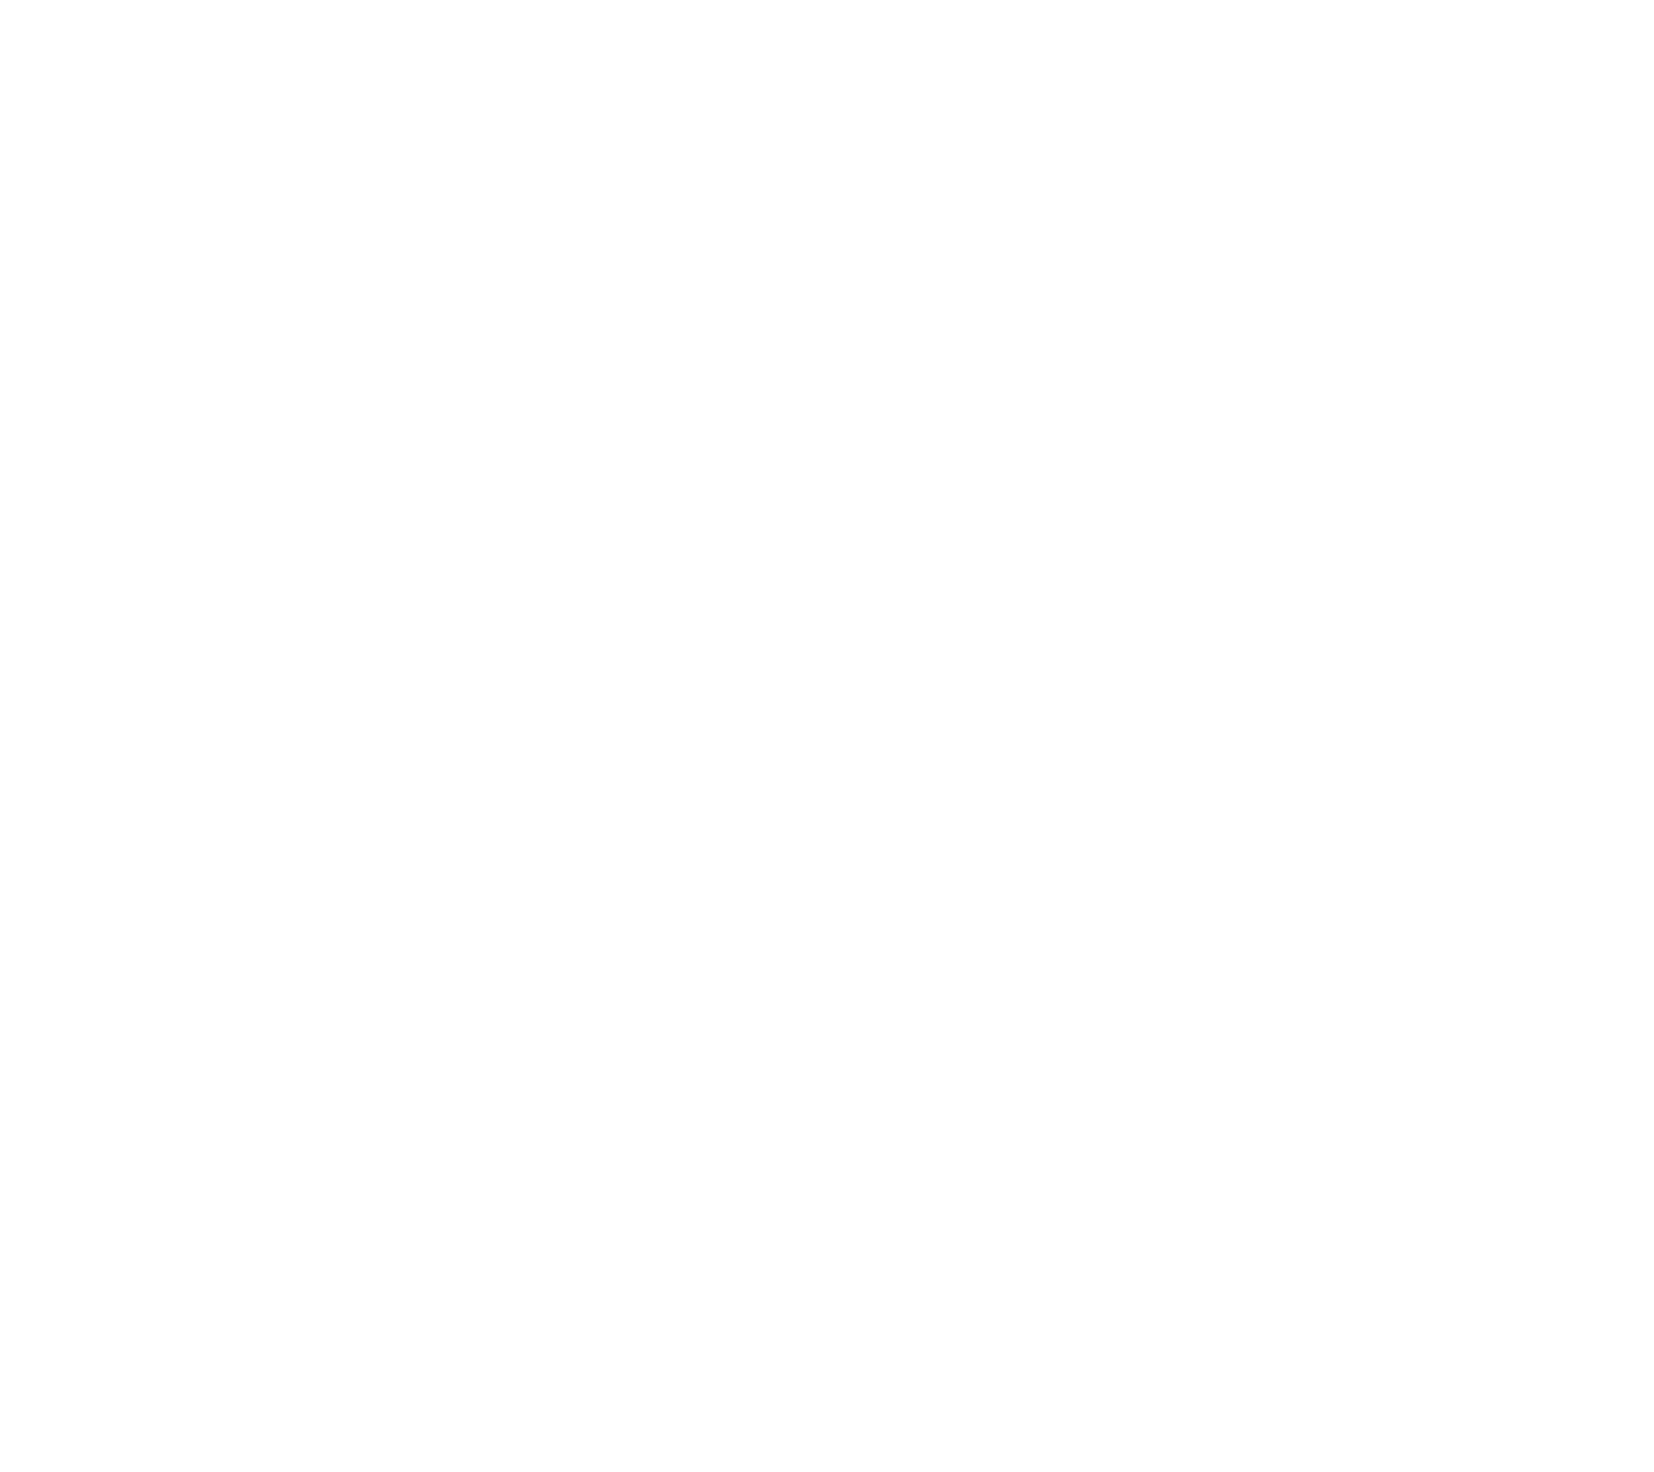 Top ten items reported to Marine Litter Watch, 2014-2017. These ten items together account for 60 % of all marine litter.